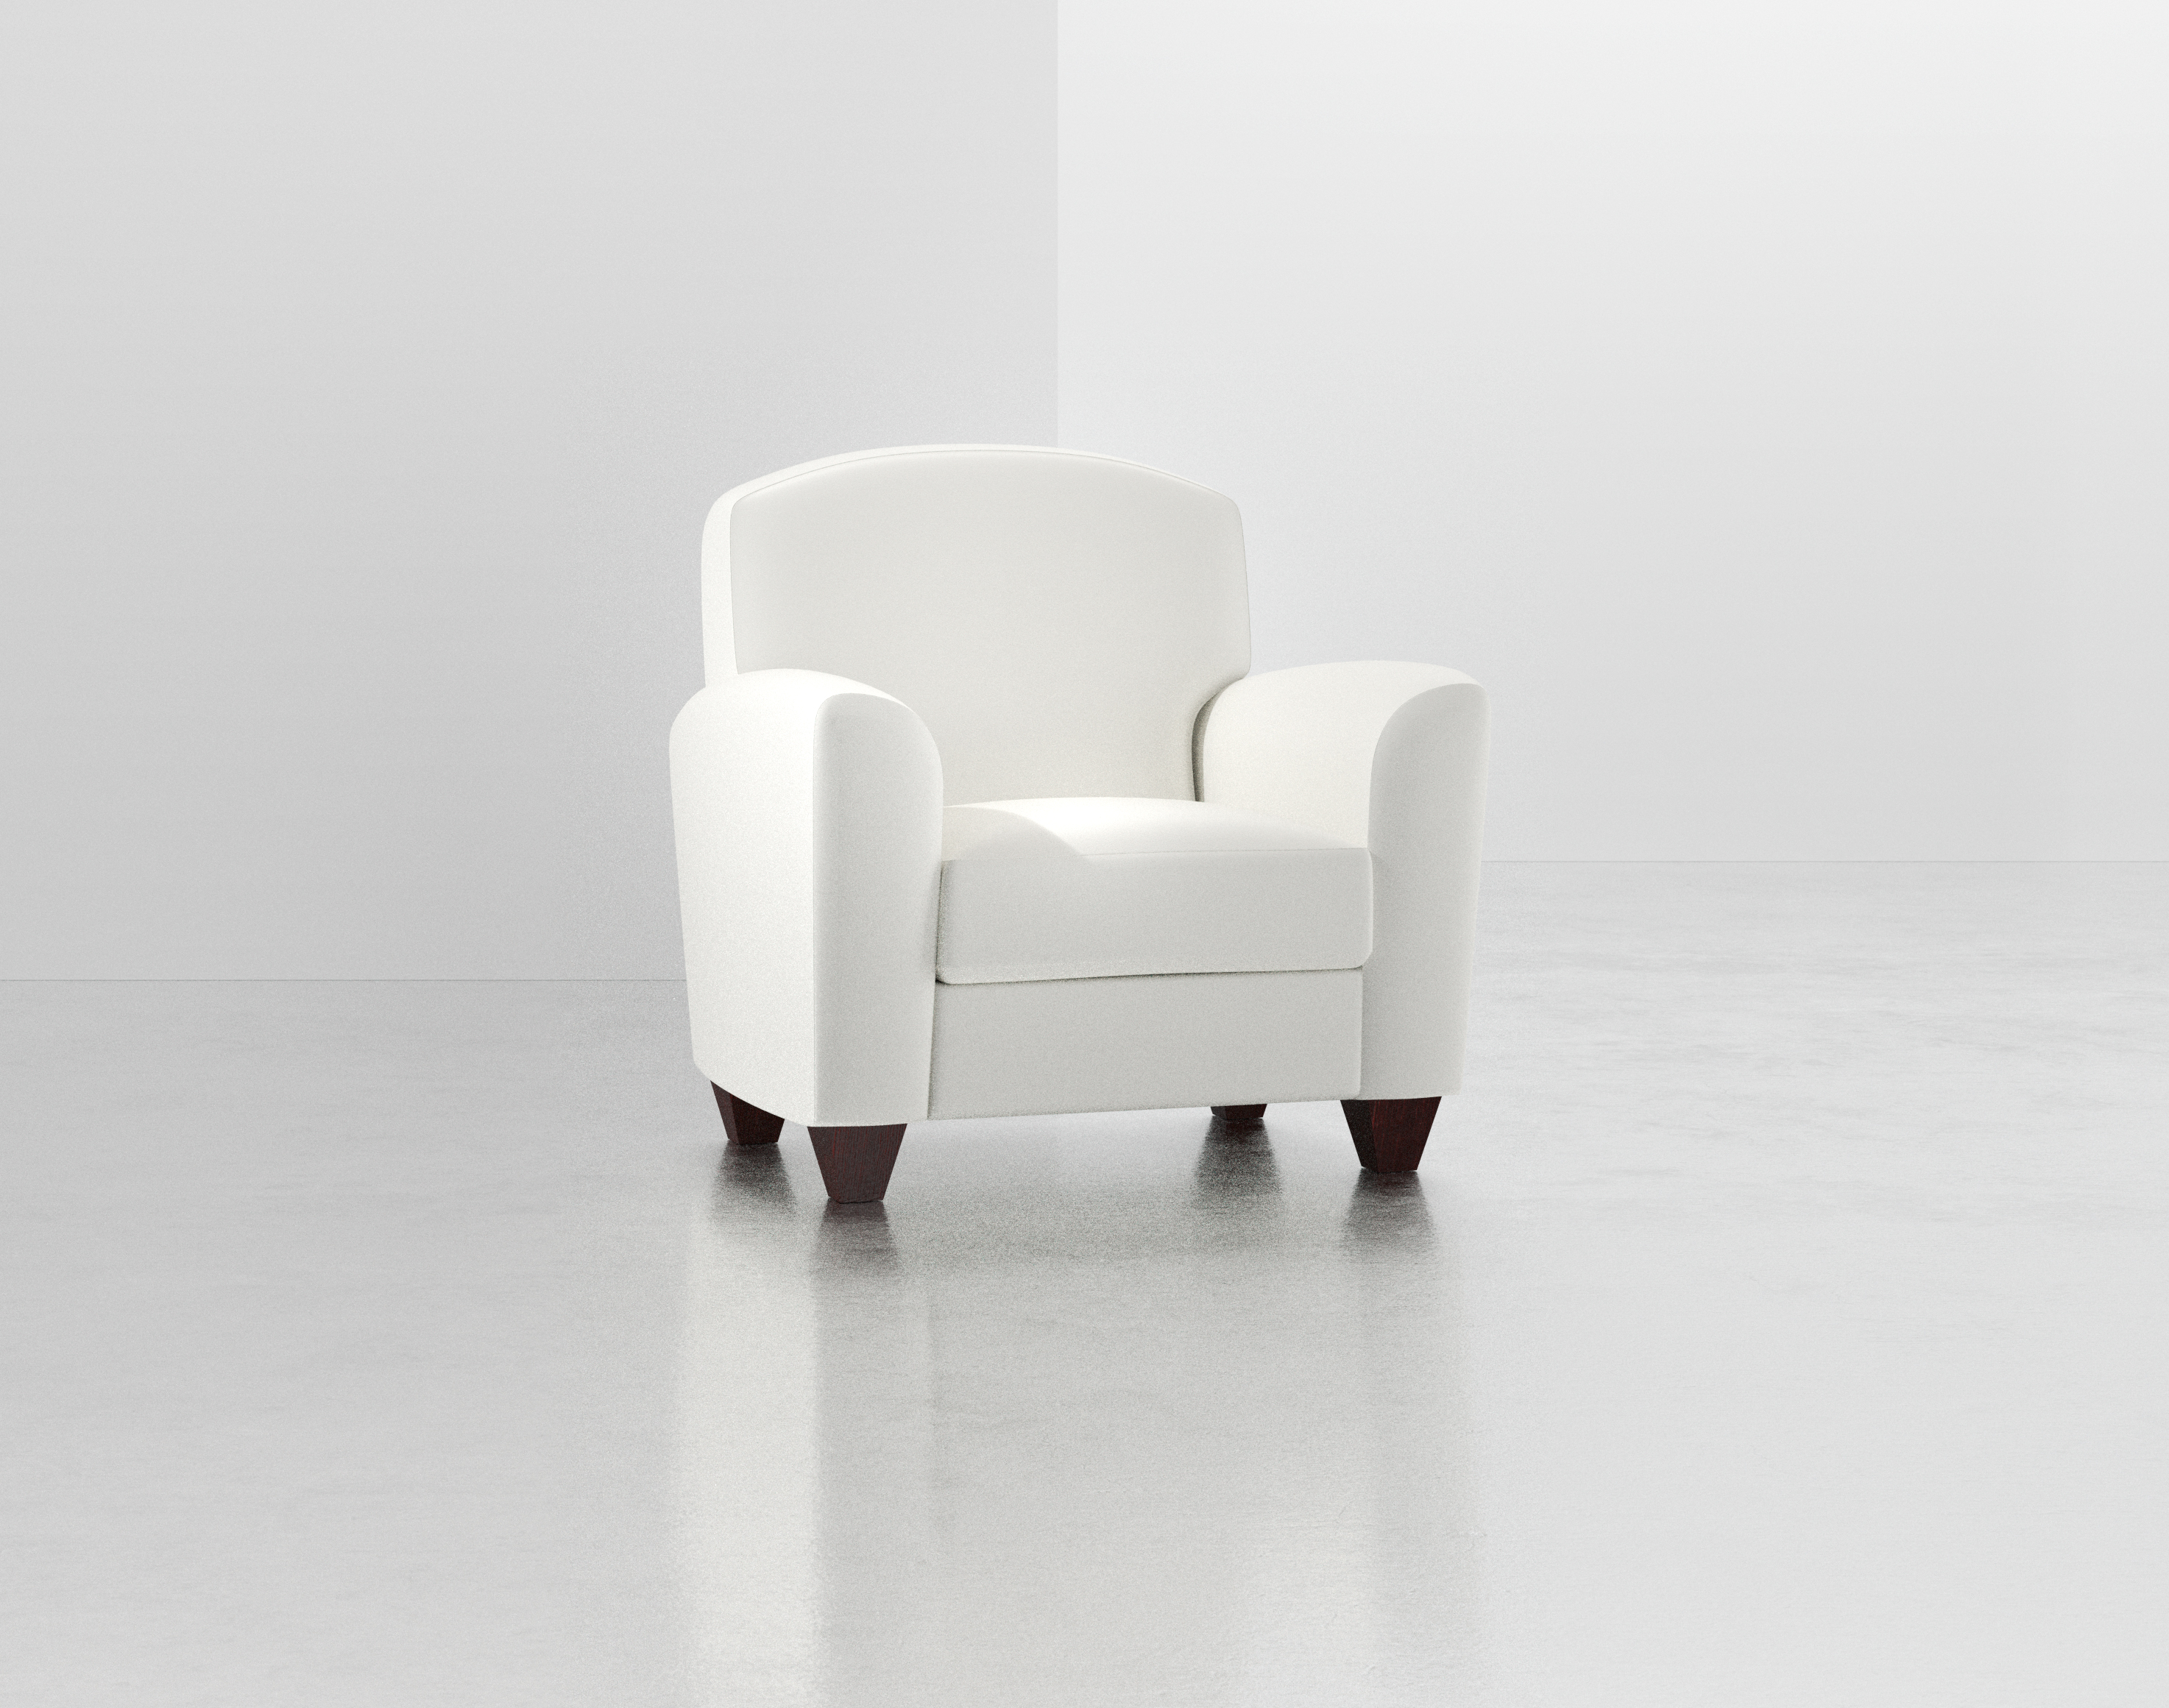 Flair Chair from Brochure Cover